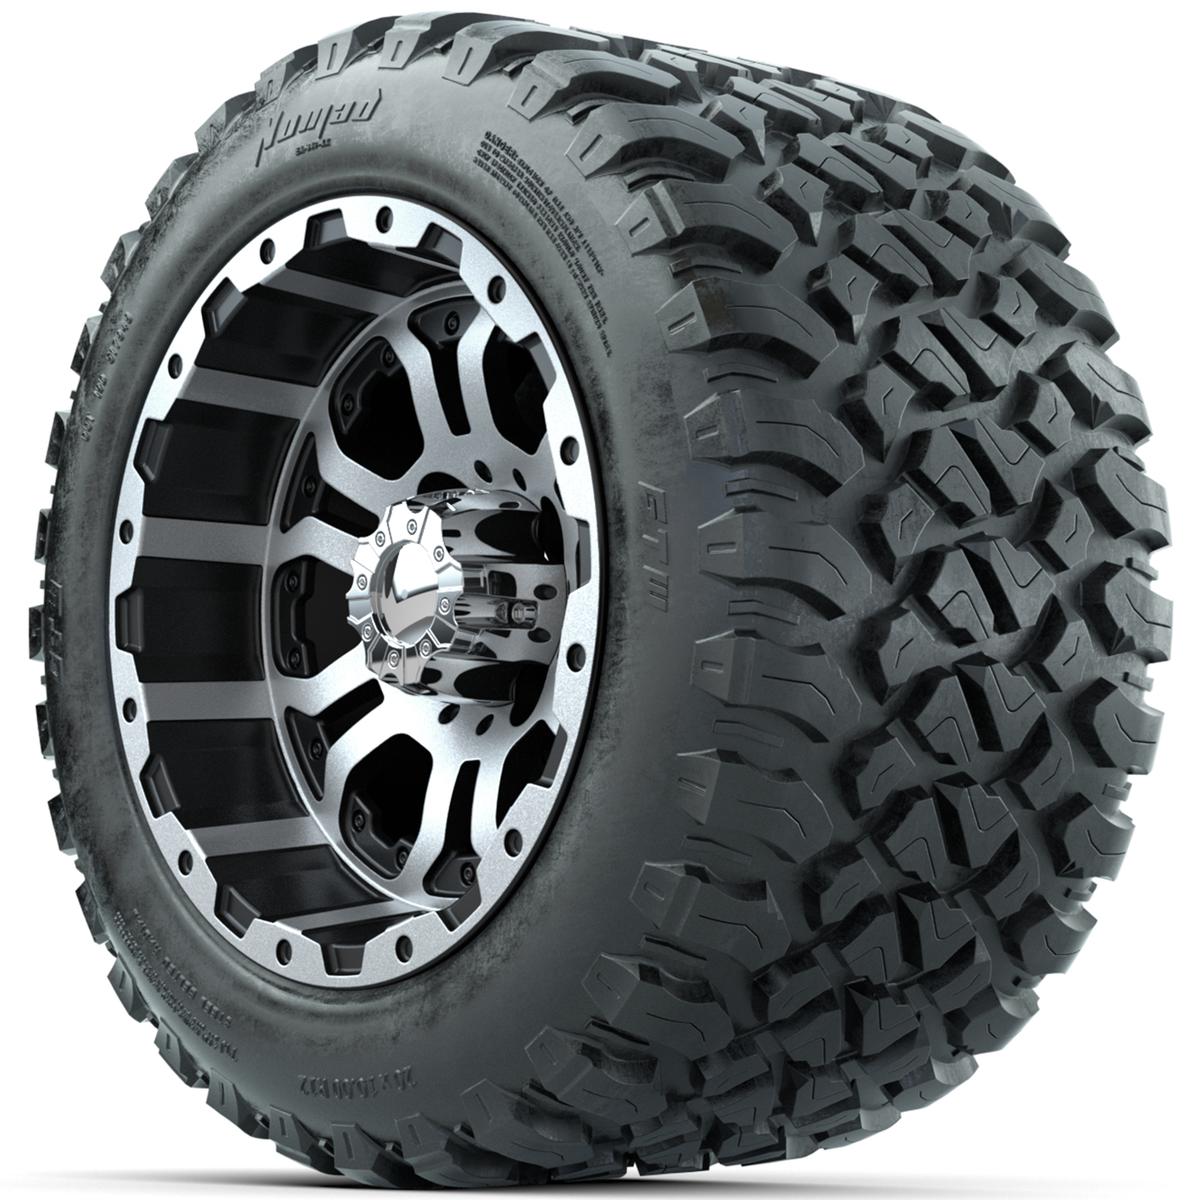 Set of (4) 12 in GTW Omega Wheels with 20x10-R12 GTW Nomad All-Terrain Tires